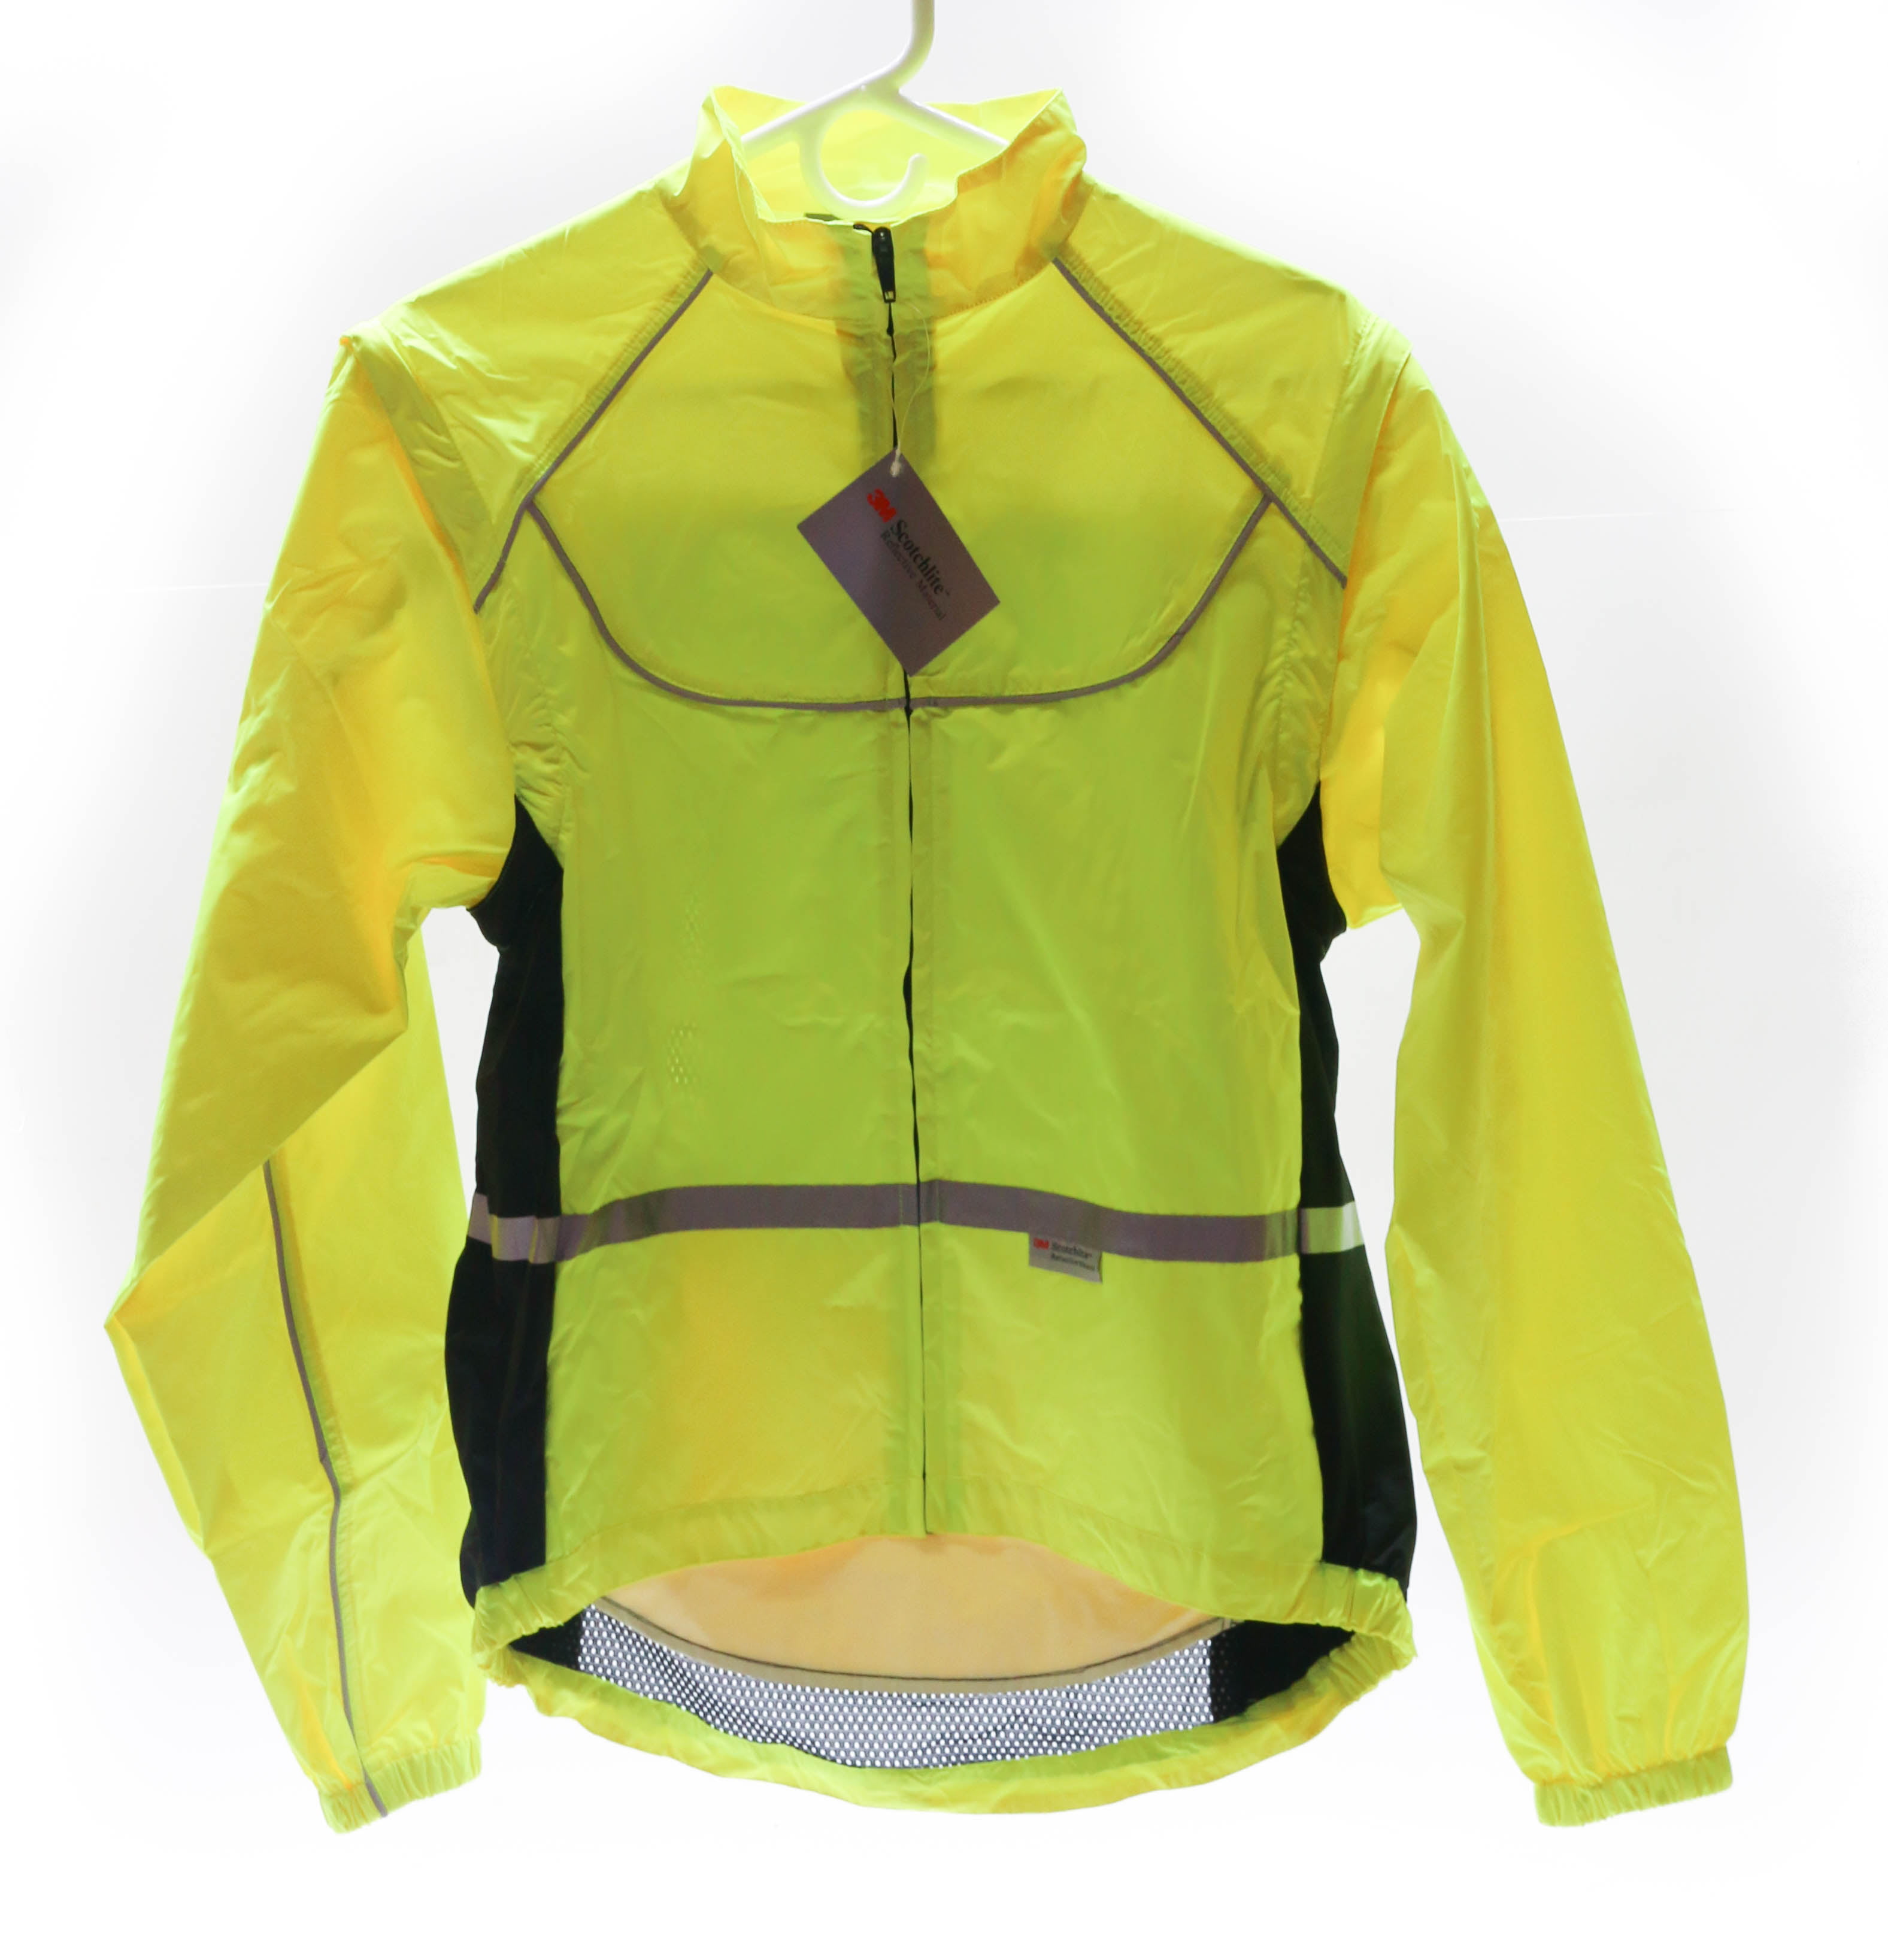 Details about   WOWOW Med Sleeveless Sport Jacket  Cycling Wind Vest 3M High-Viz Reflective NEW 